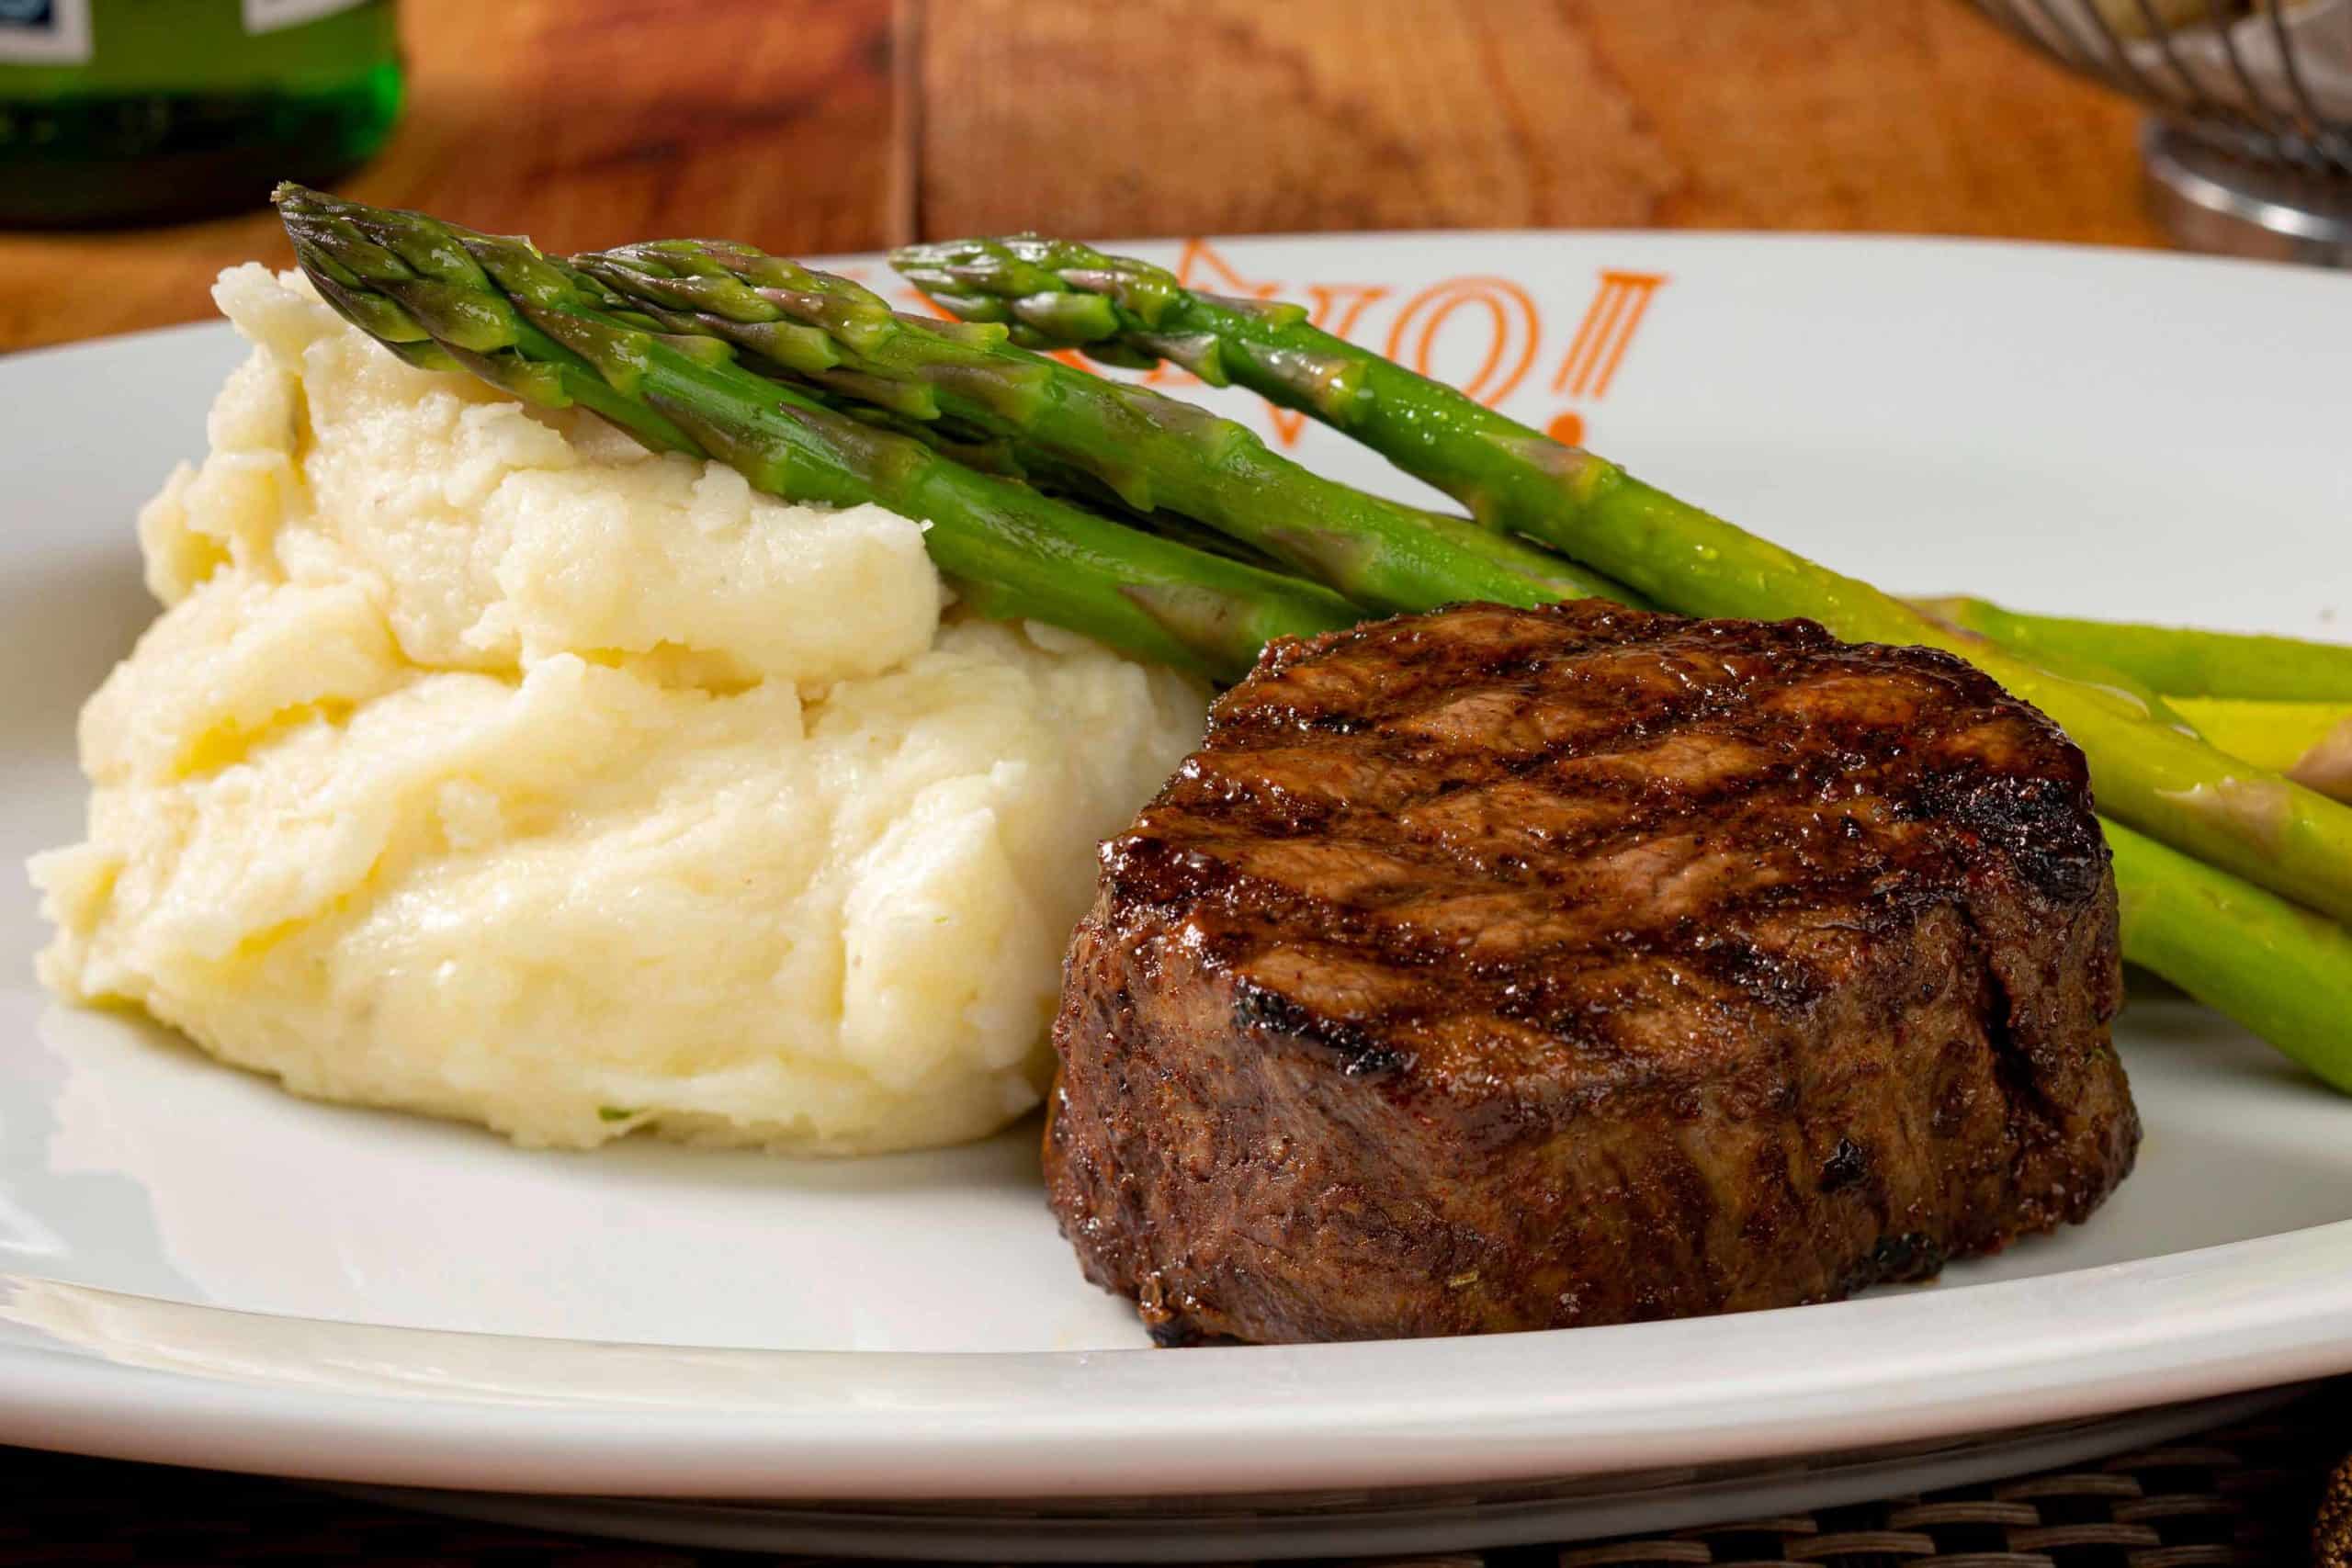 Steak and Mashed Potatoes with Asparagus on a wooden table